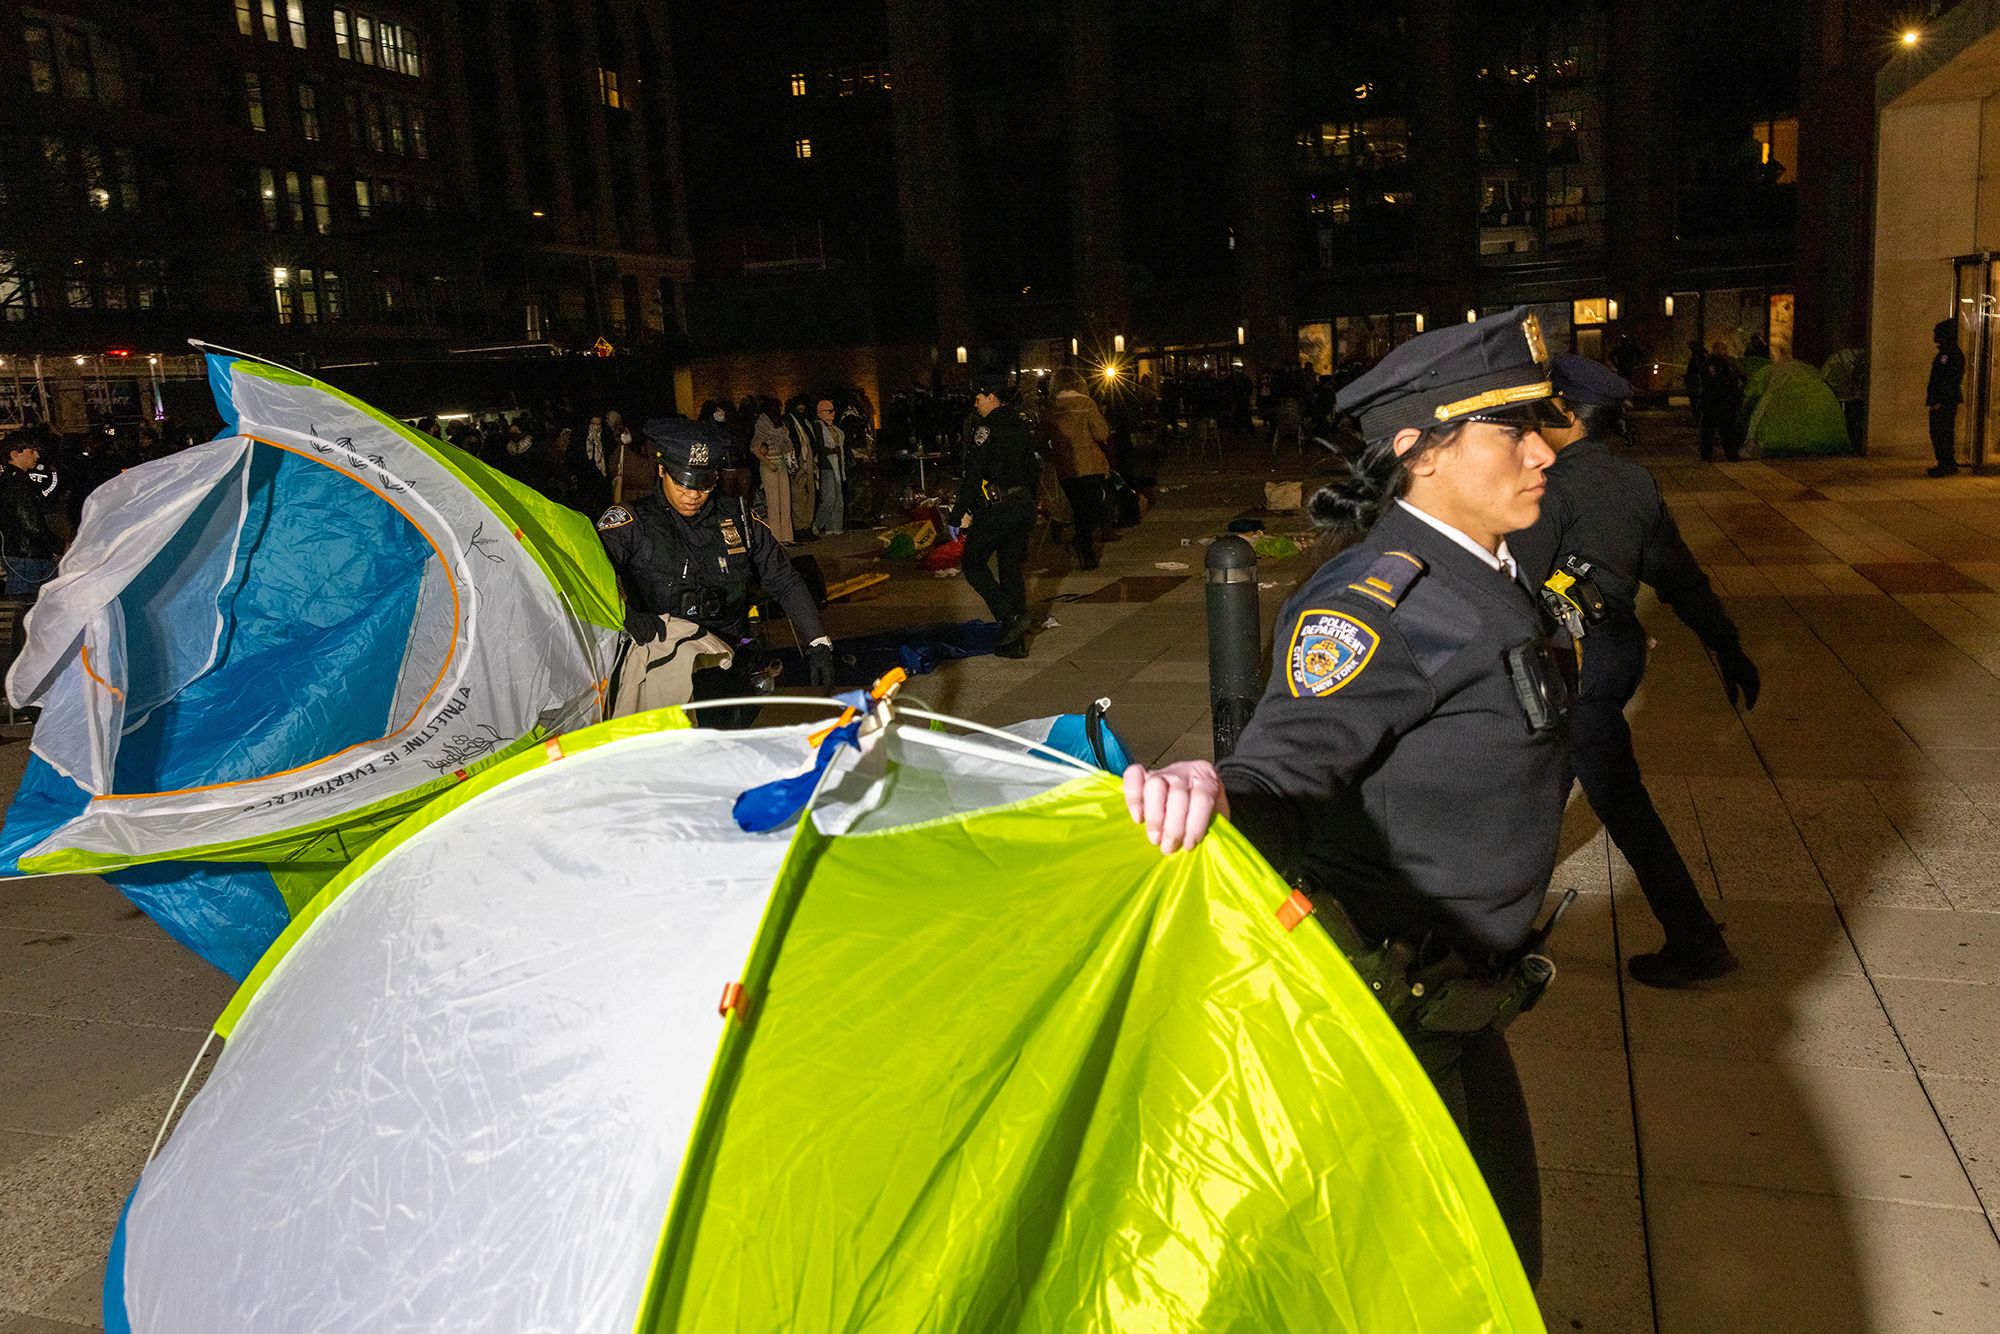 Police officers clear away tents from an encampment at New York University on April 22.